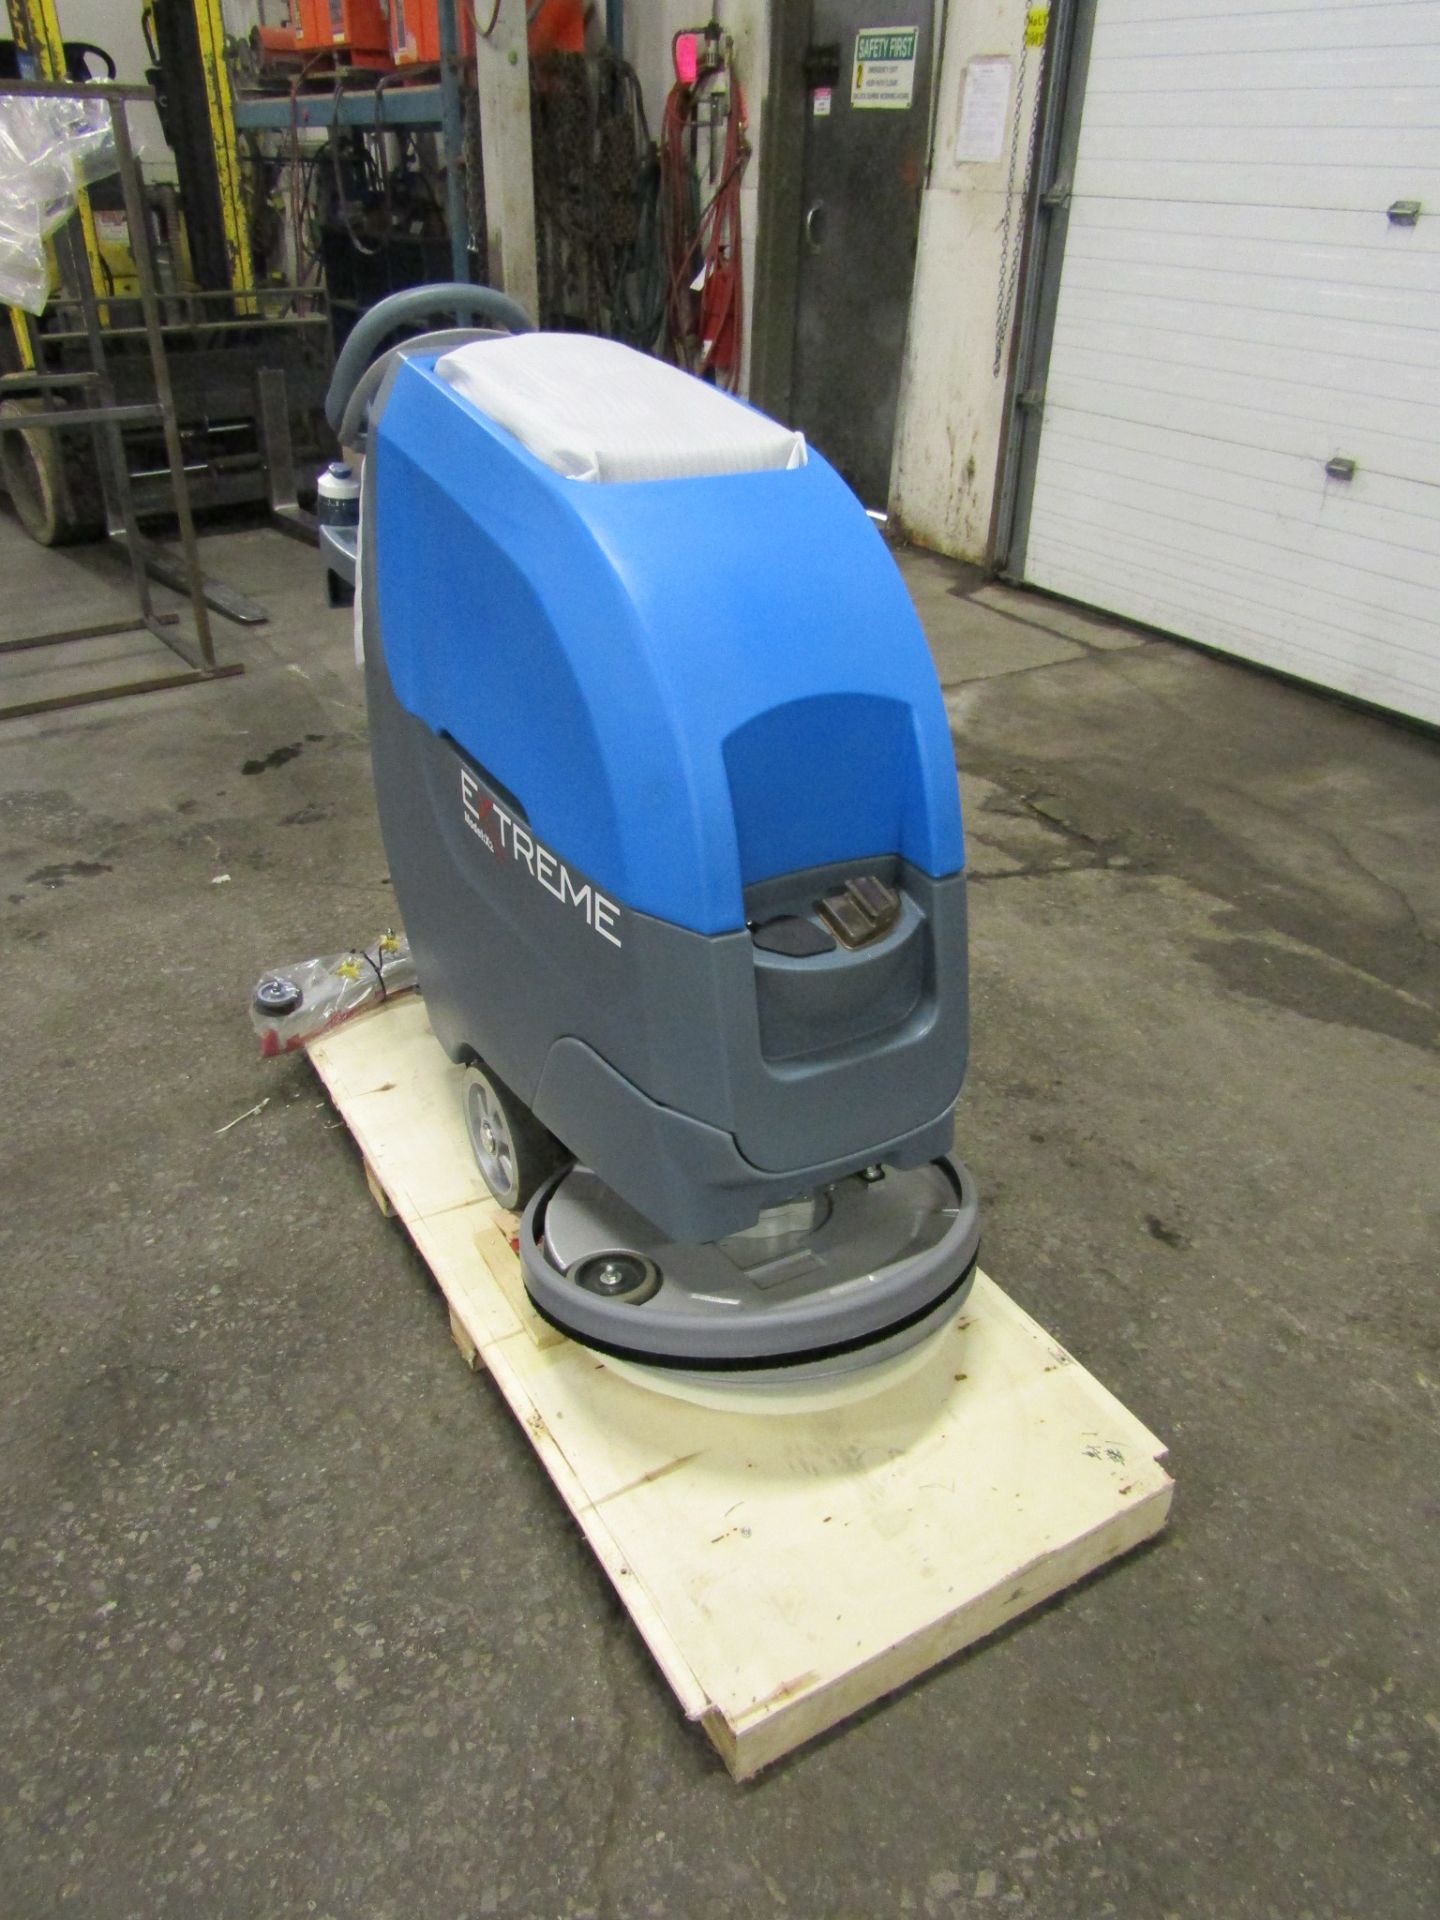 Extreme MINT Walk Behind Floor Sweeper Scrubber Unit model X2 - BRAND NEW with extra pads, digital - Image 3 of 3